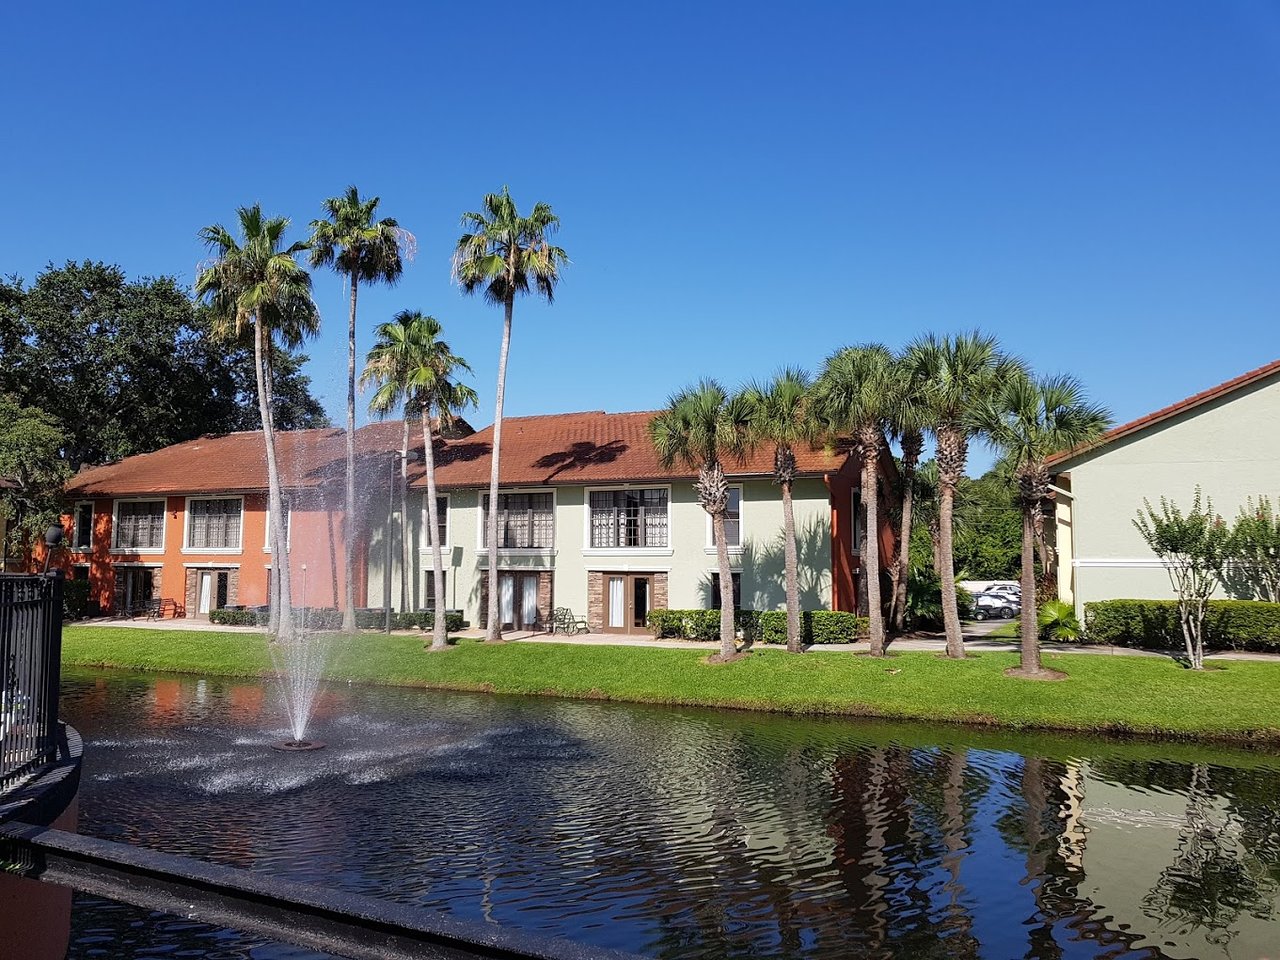 Legacy Vacation Resorts Kissimmee Orlando Water Feature